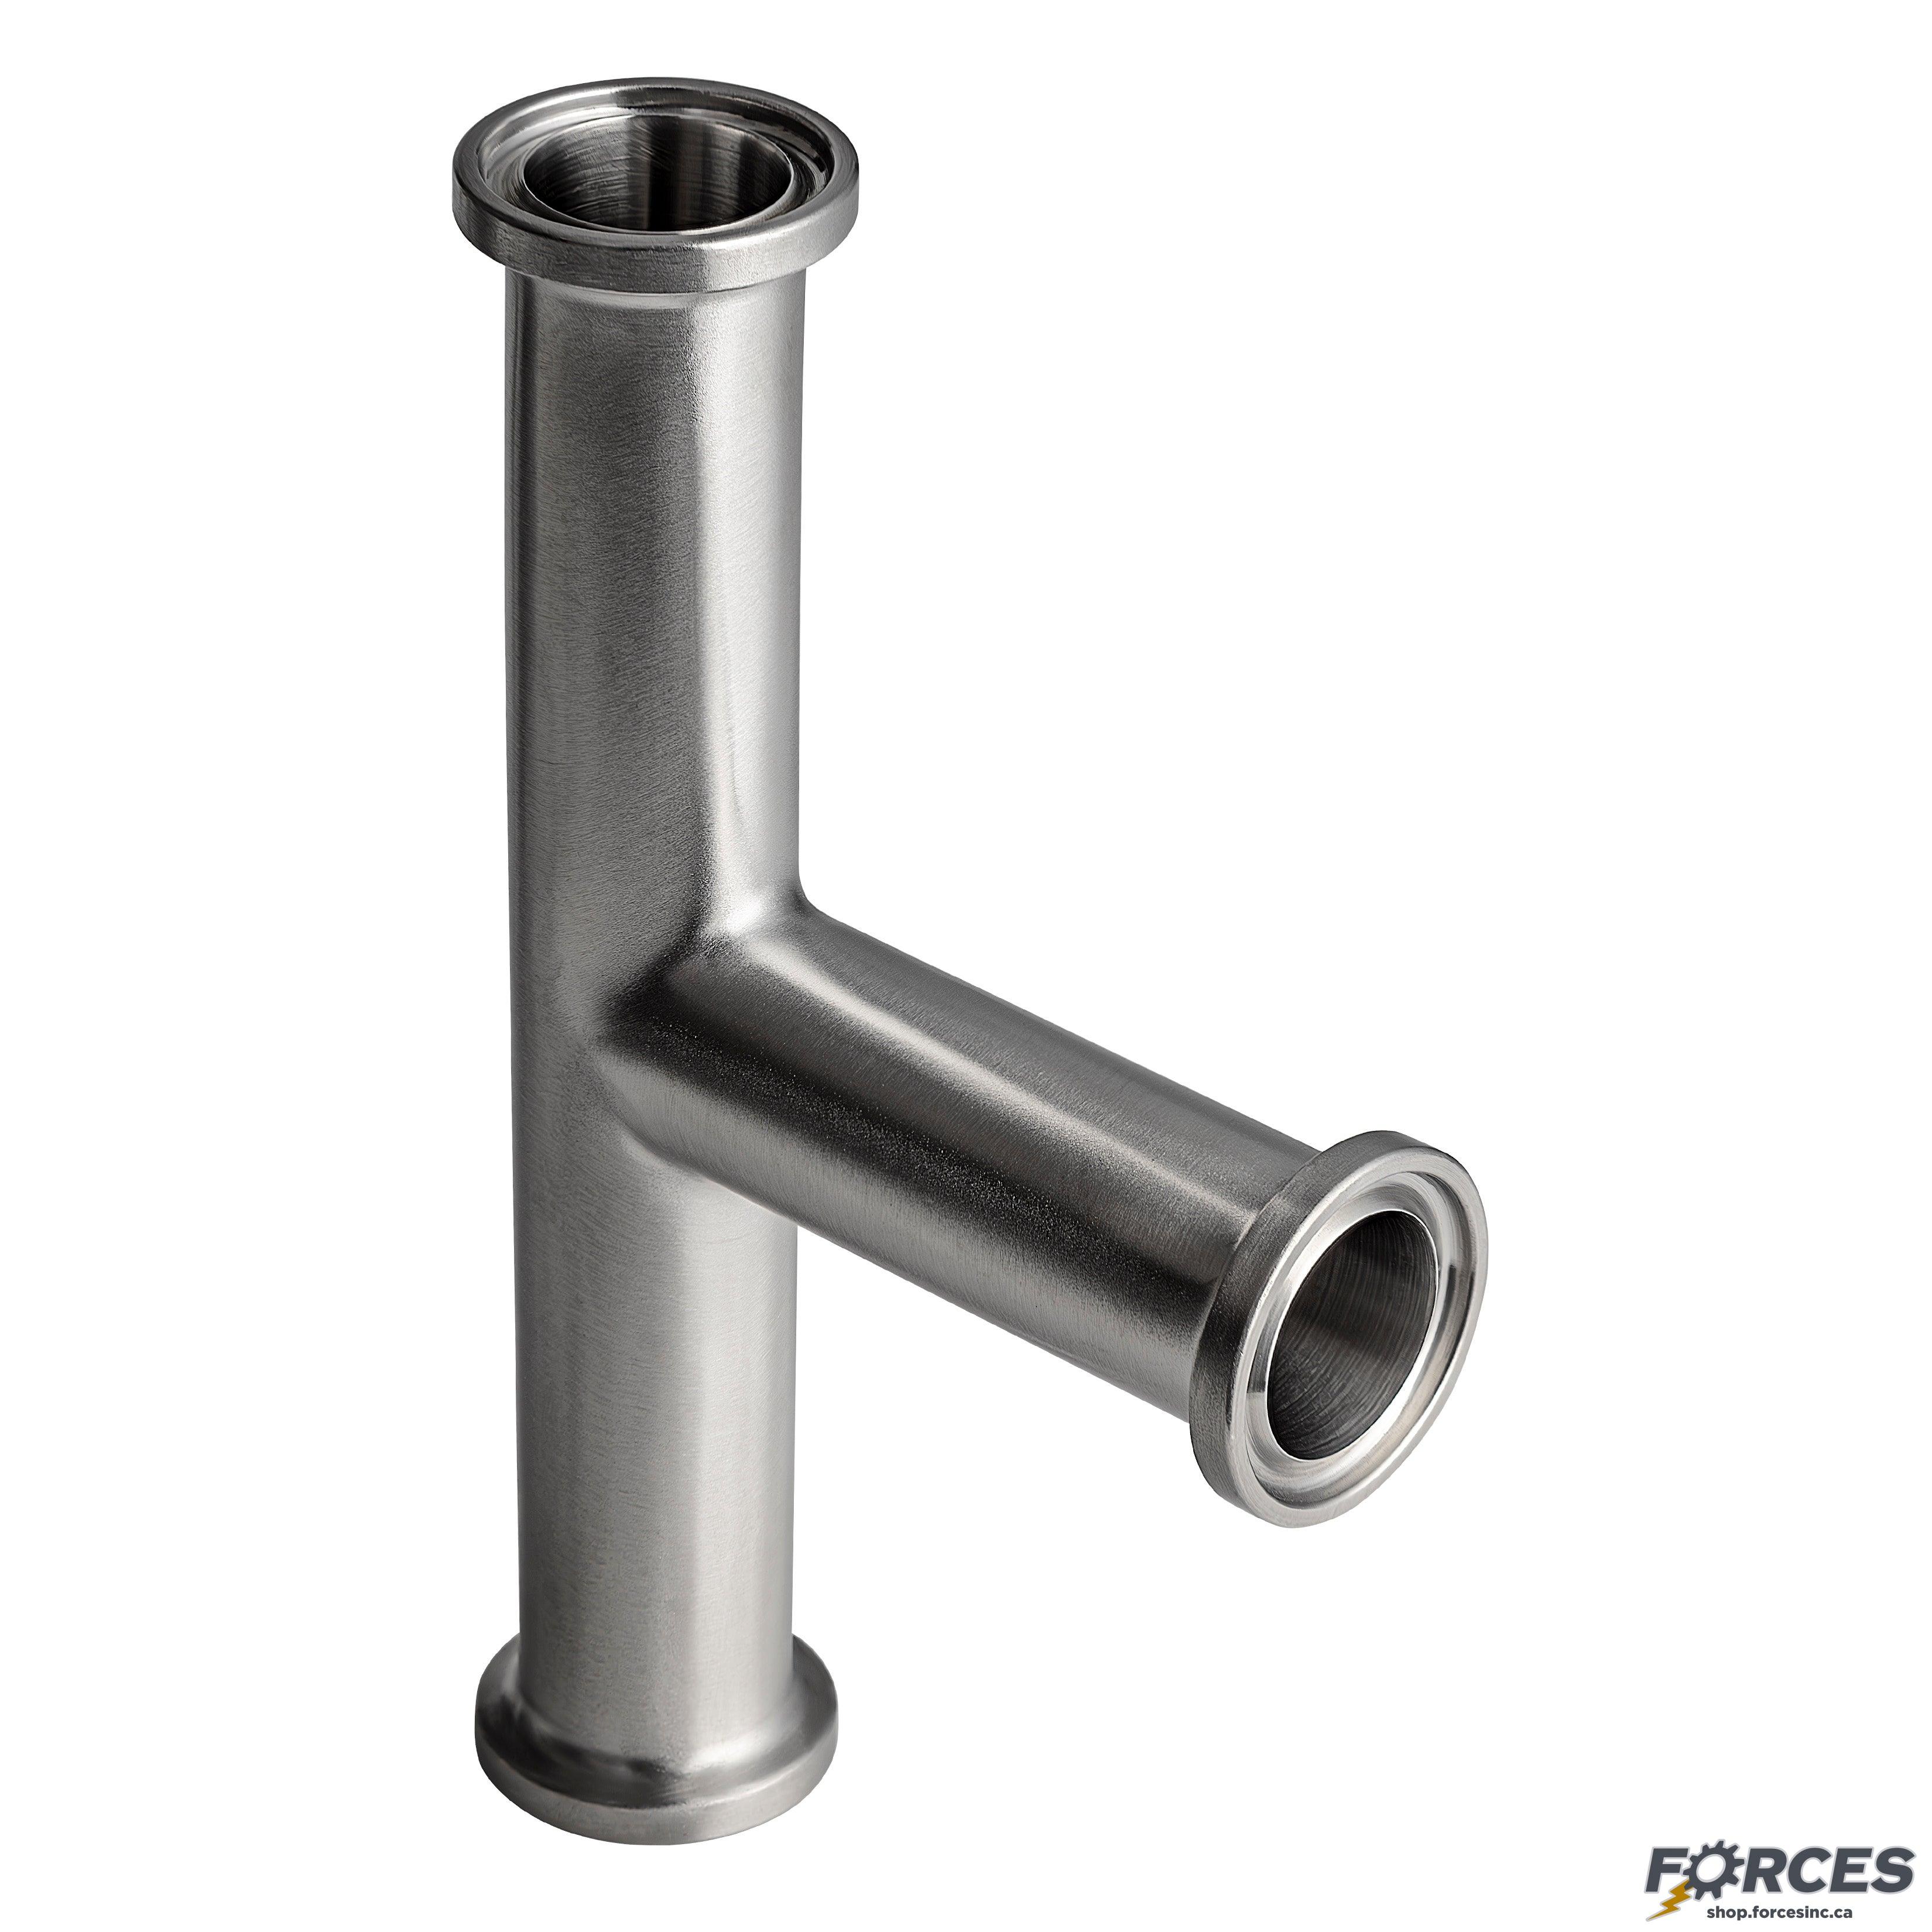 6" Tri-Clamp Tee - Stainless Steel 304 - Forces Inc